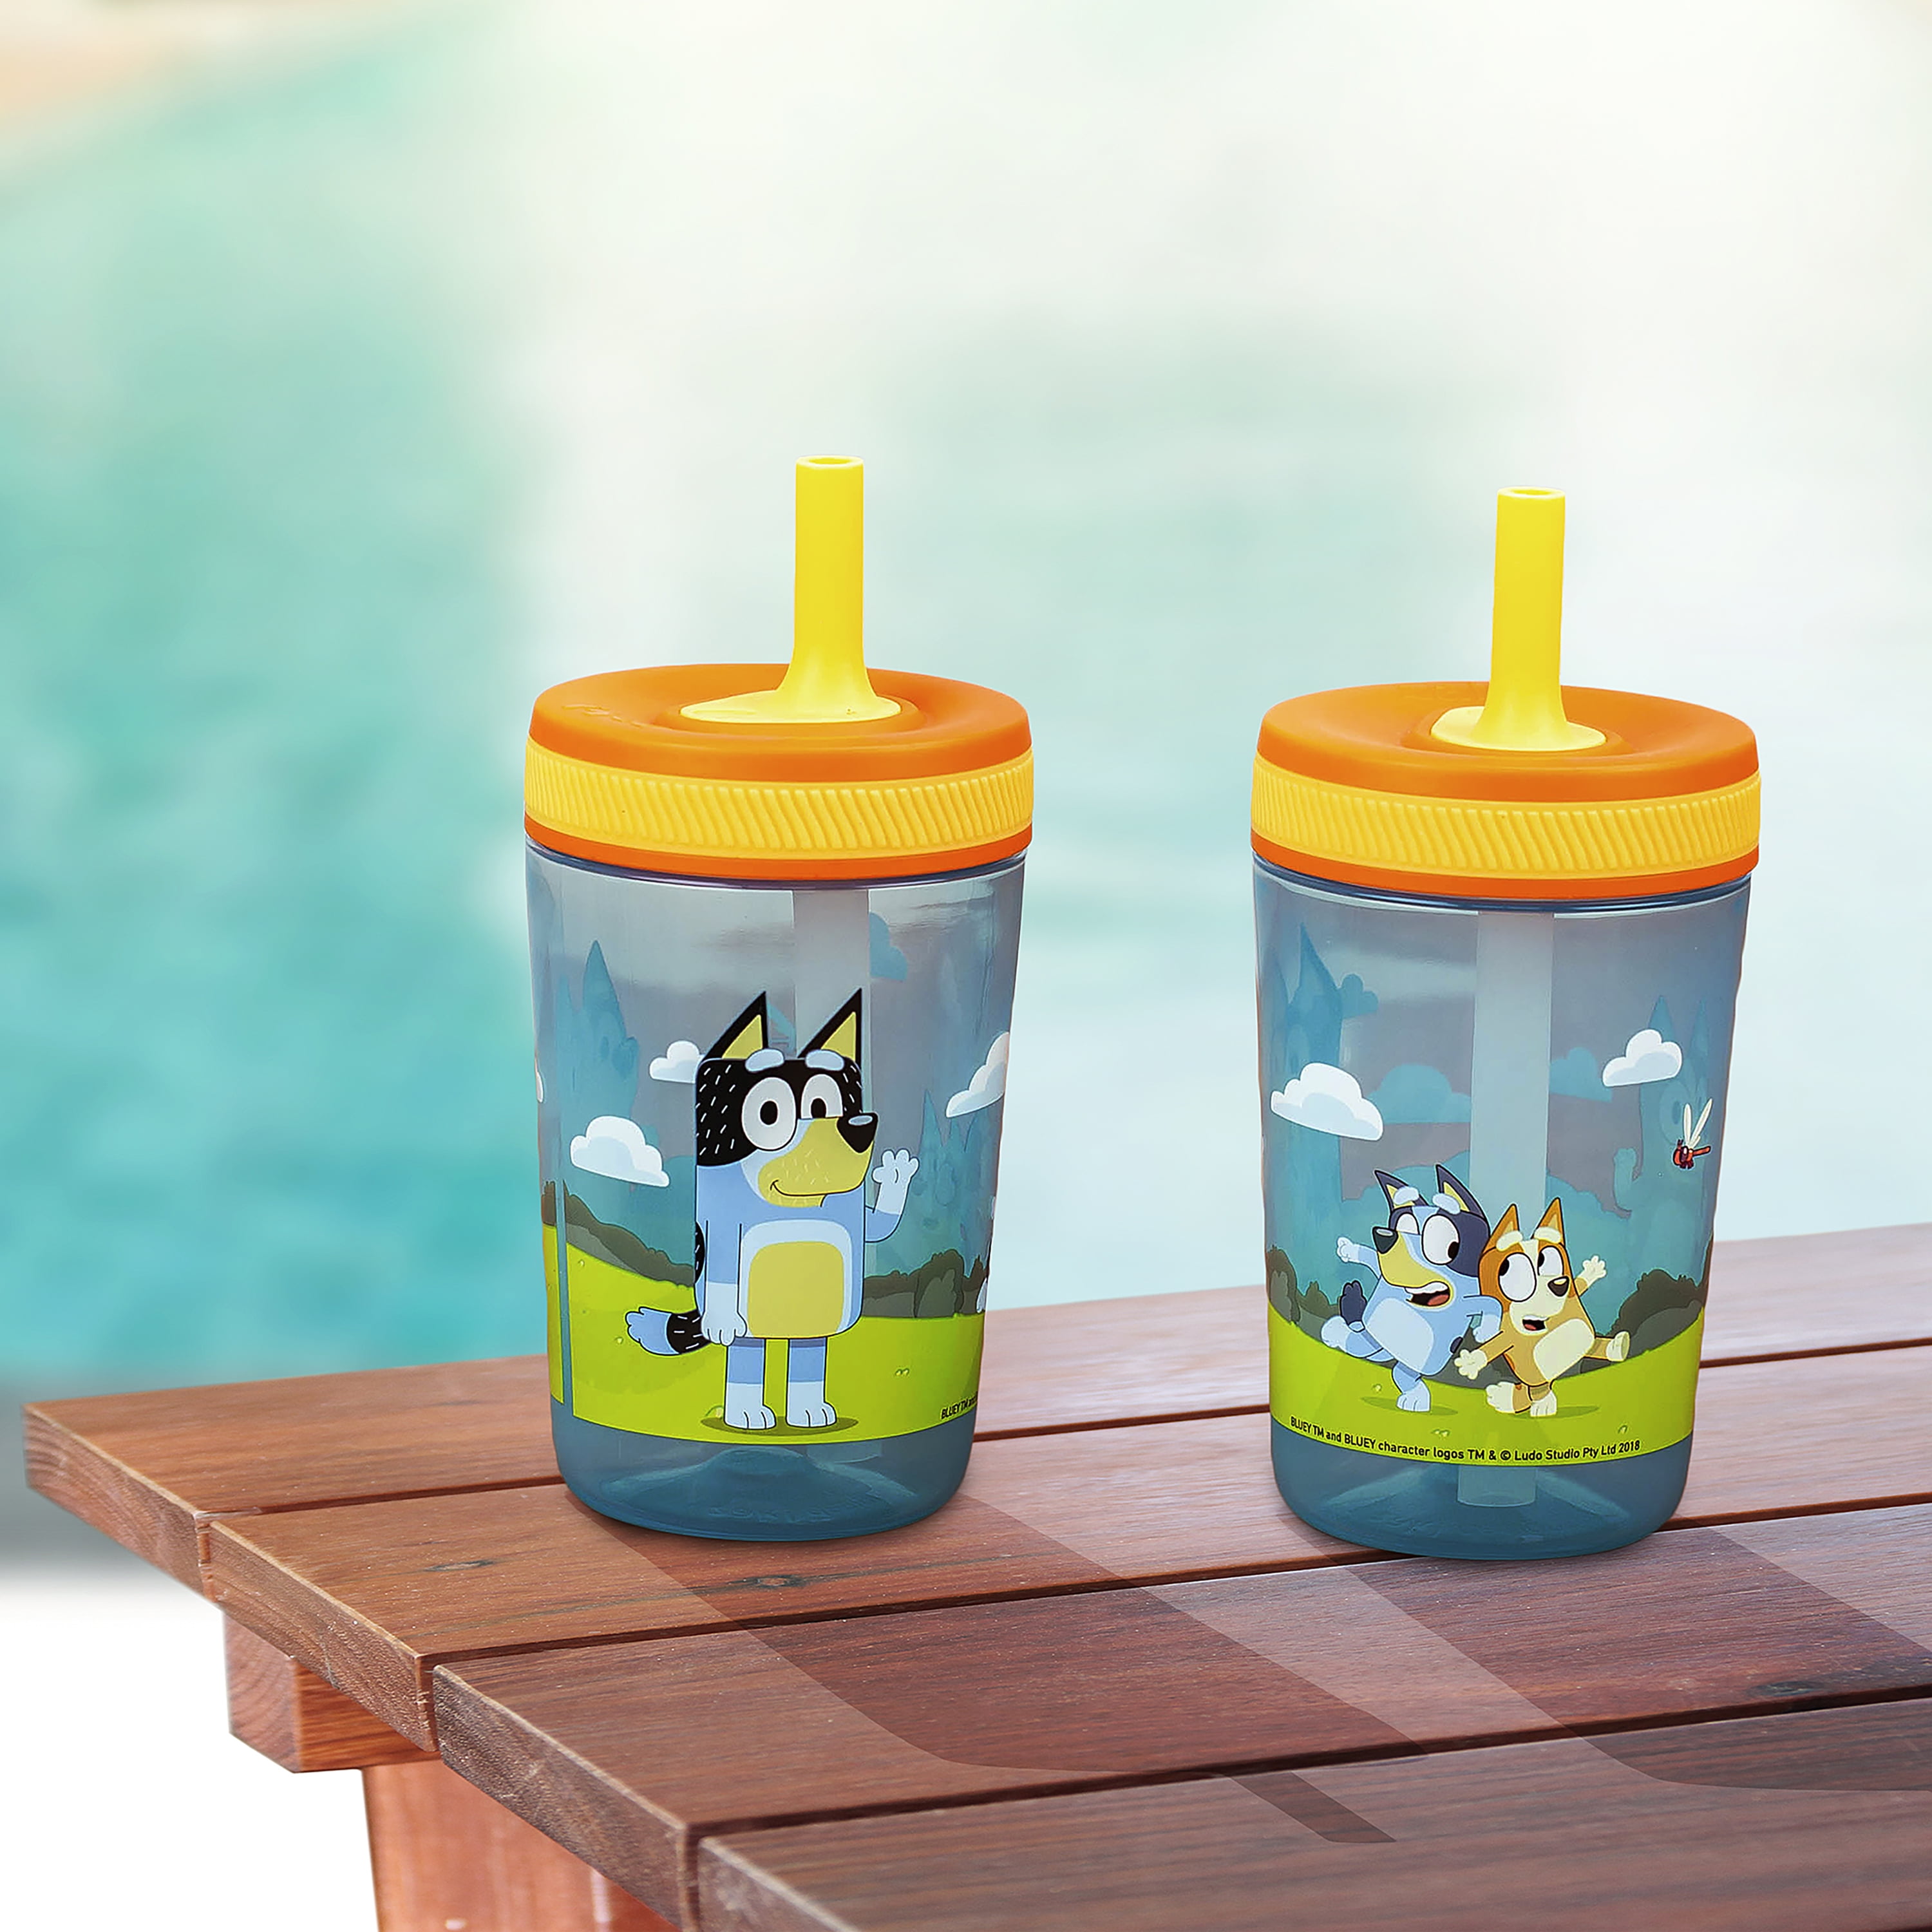 Bluey Super Sipper 13 oz Toddler Kids Cup With Straw Zak Designs